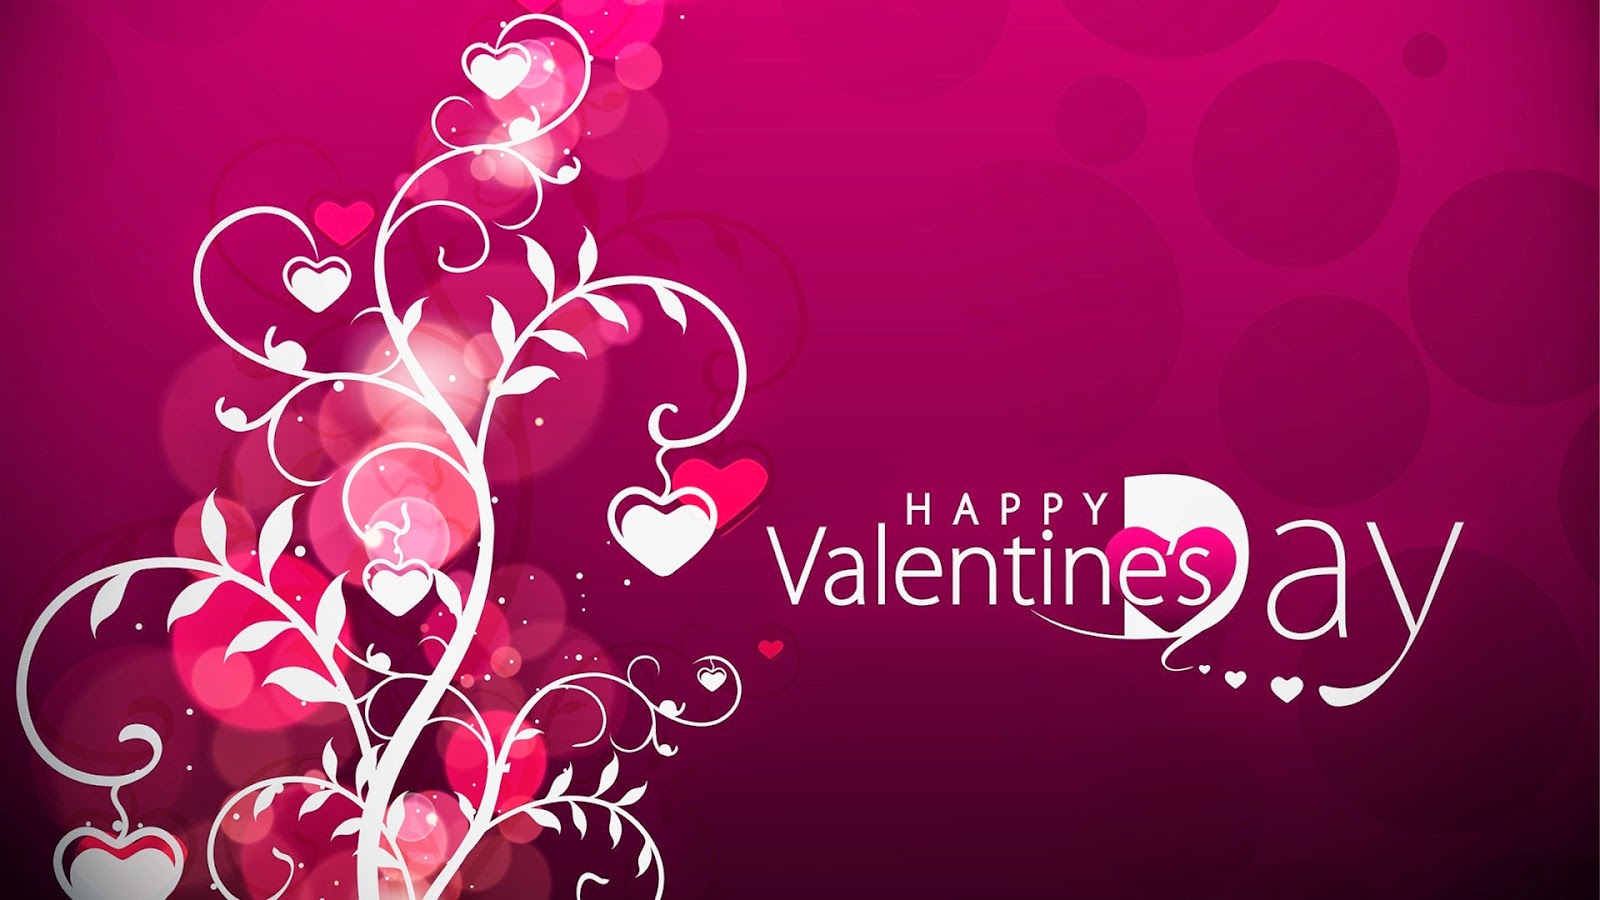 15 New Valentines Day Desktop Wallpapers for 2015   Brand